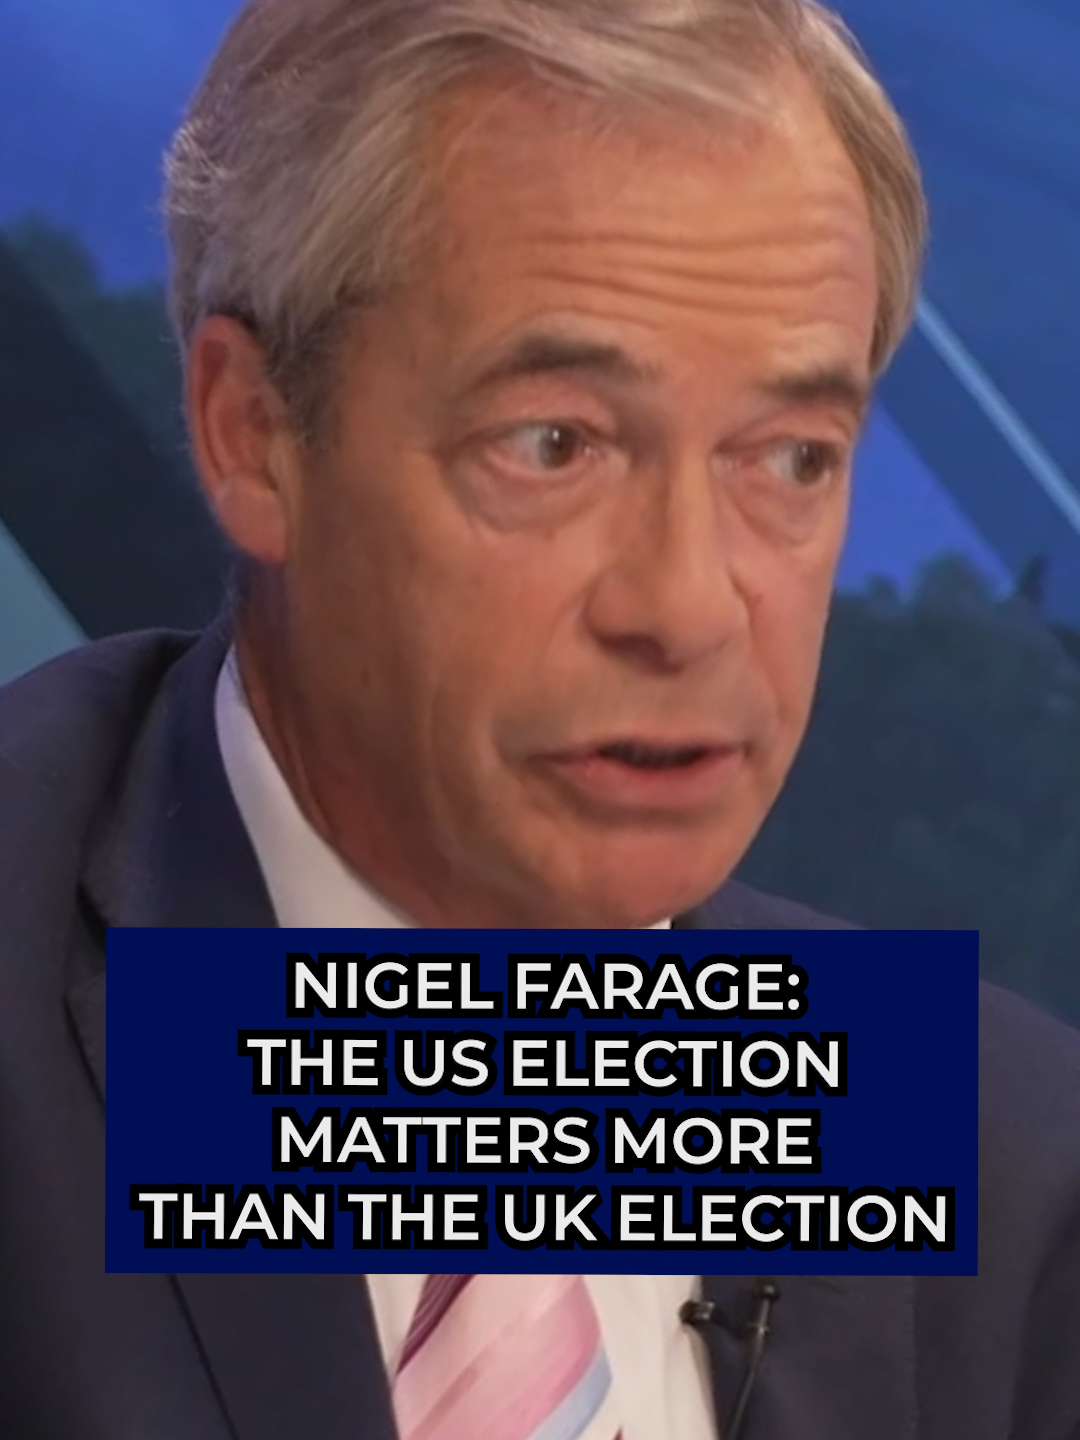 Nigel Farage explains why he thinks the US Presidential election is more important than the UK general election. Speaking to Tom Harwood on GB News, Farage said: 'The American election matters more to us, it matters more to the world... We're in a very bad place. We have to recognise the leader of the western world is America.' #nigelfarage #Farage #ReformUK #Trump #uselection #ukelection #GBNews